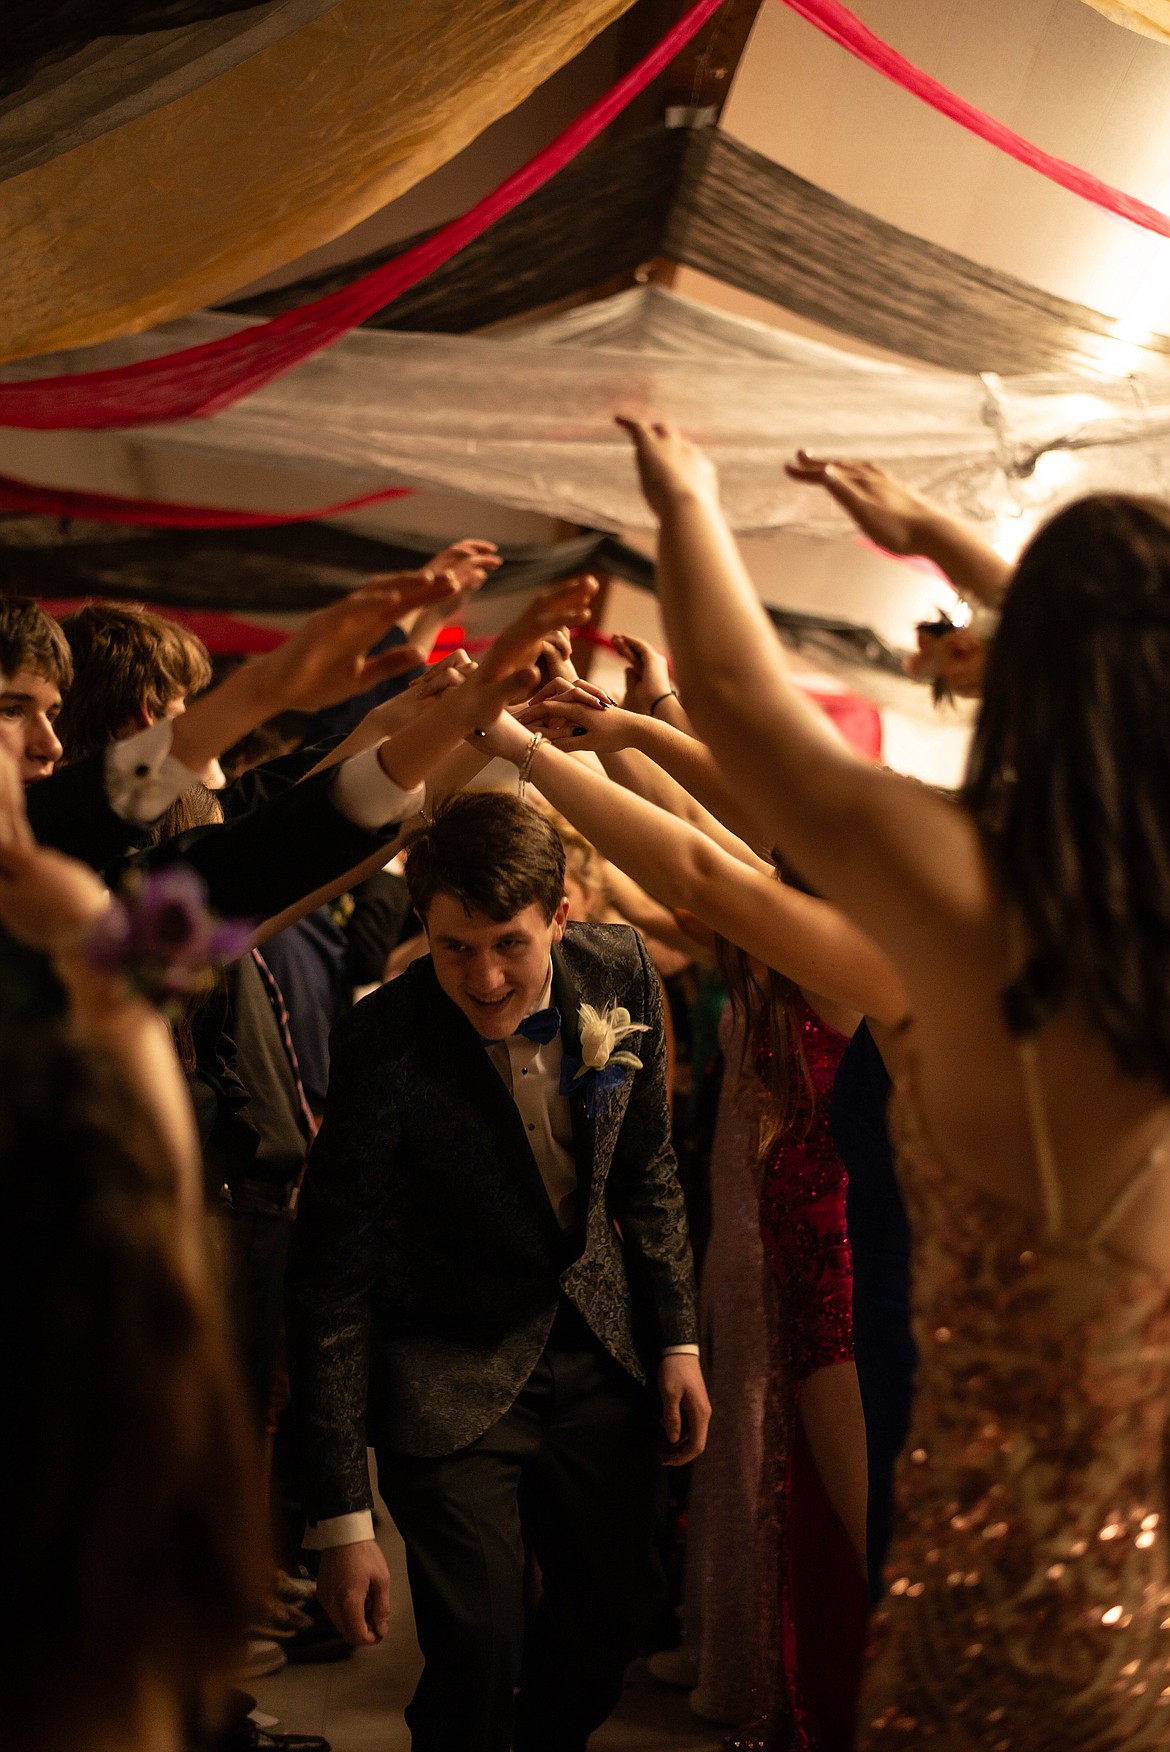 Students dance at the Superior High School prom. (Tamara Durovey photo)